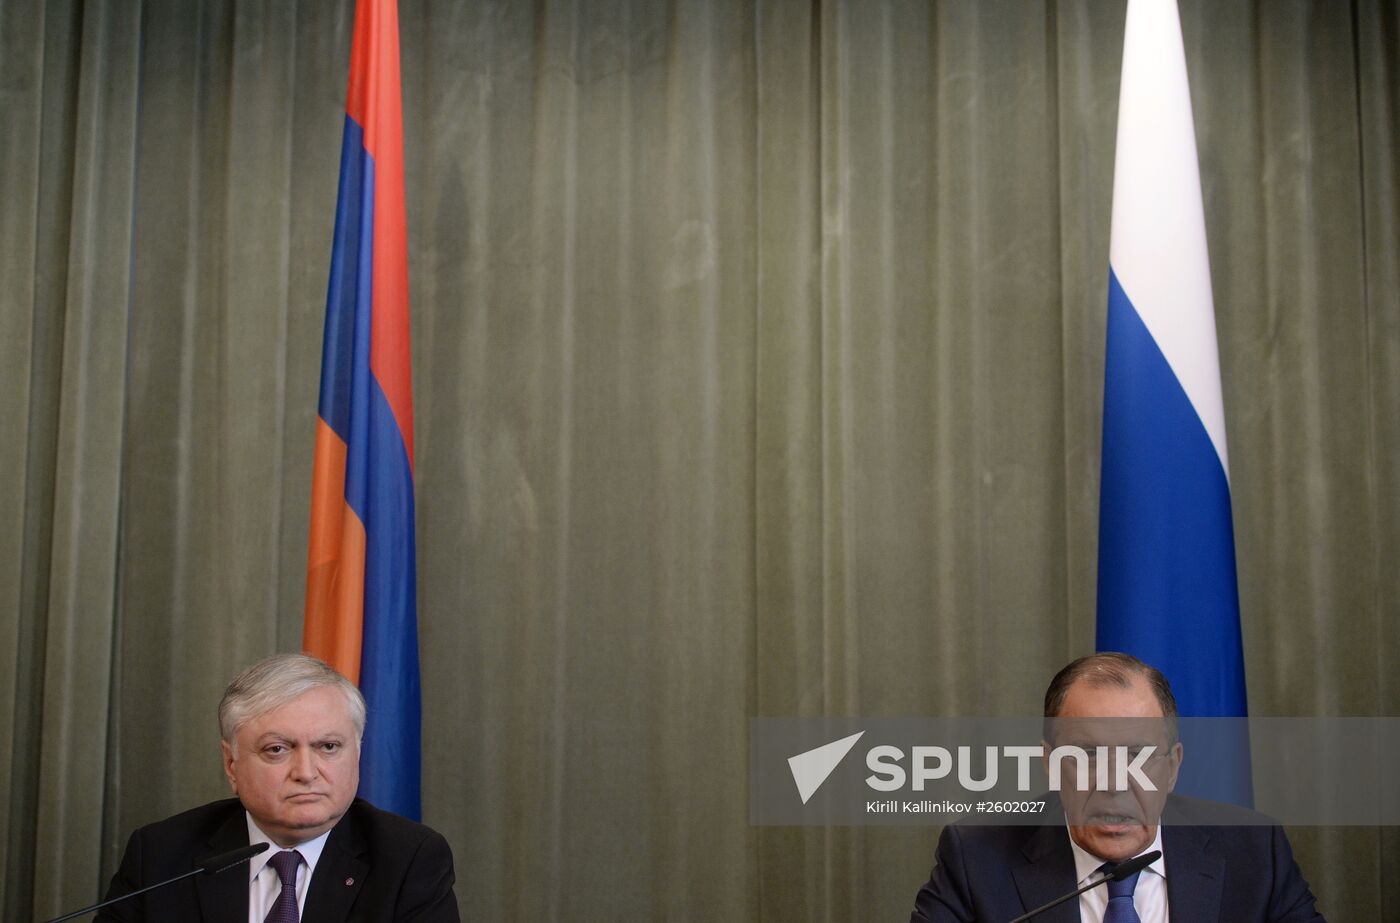 Meeting of Russian and Armenian foreign ministers